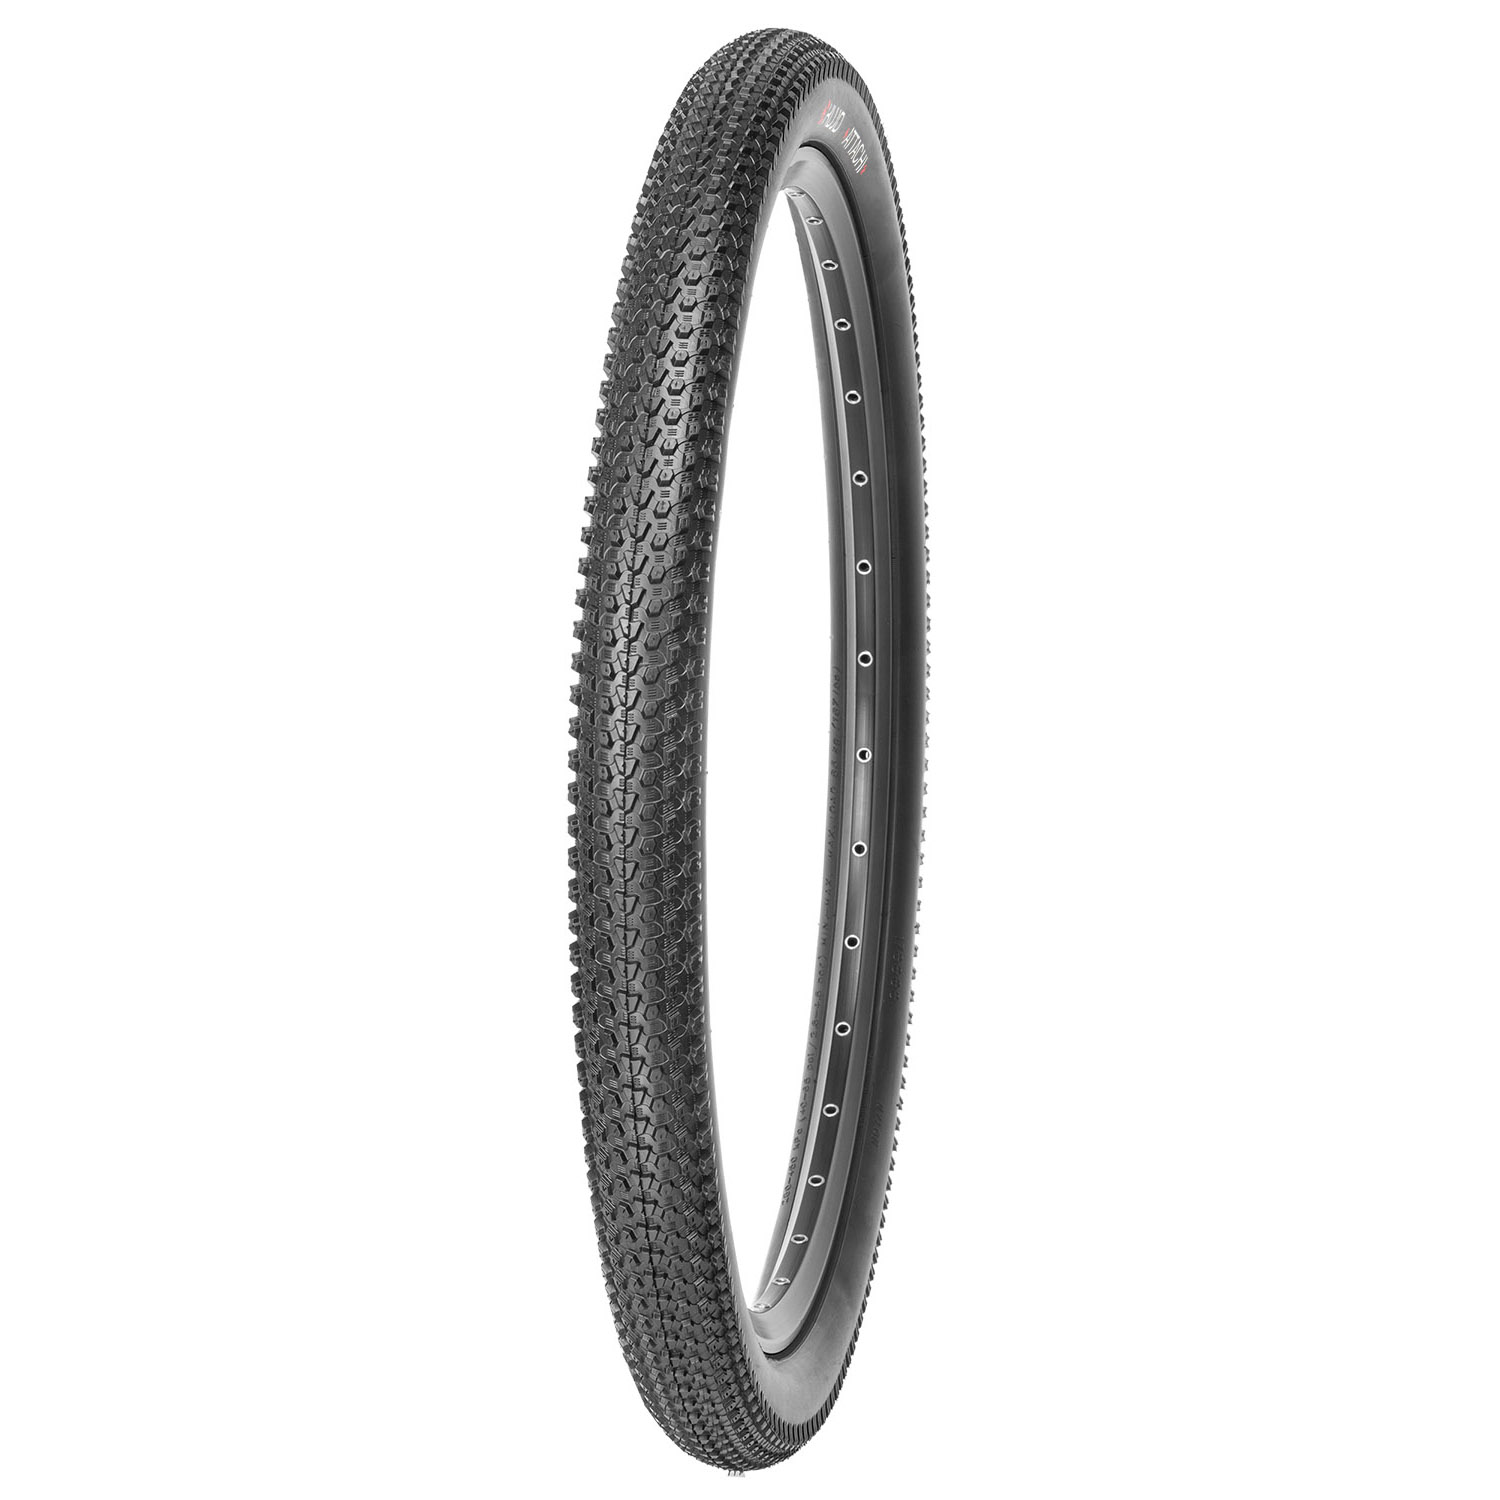 558062 KUJO Attachi 27.5 x 2.10″ Clincher – AVAILABLE IN SELECTED BIKE SHOP